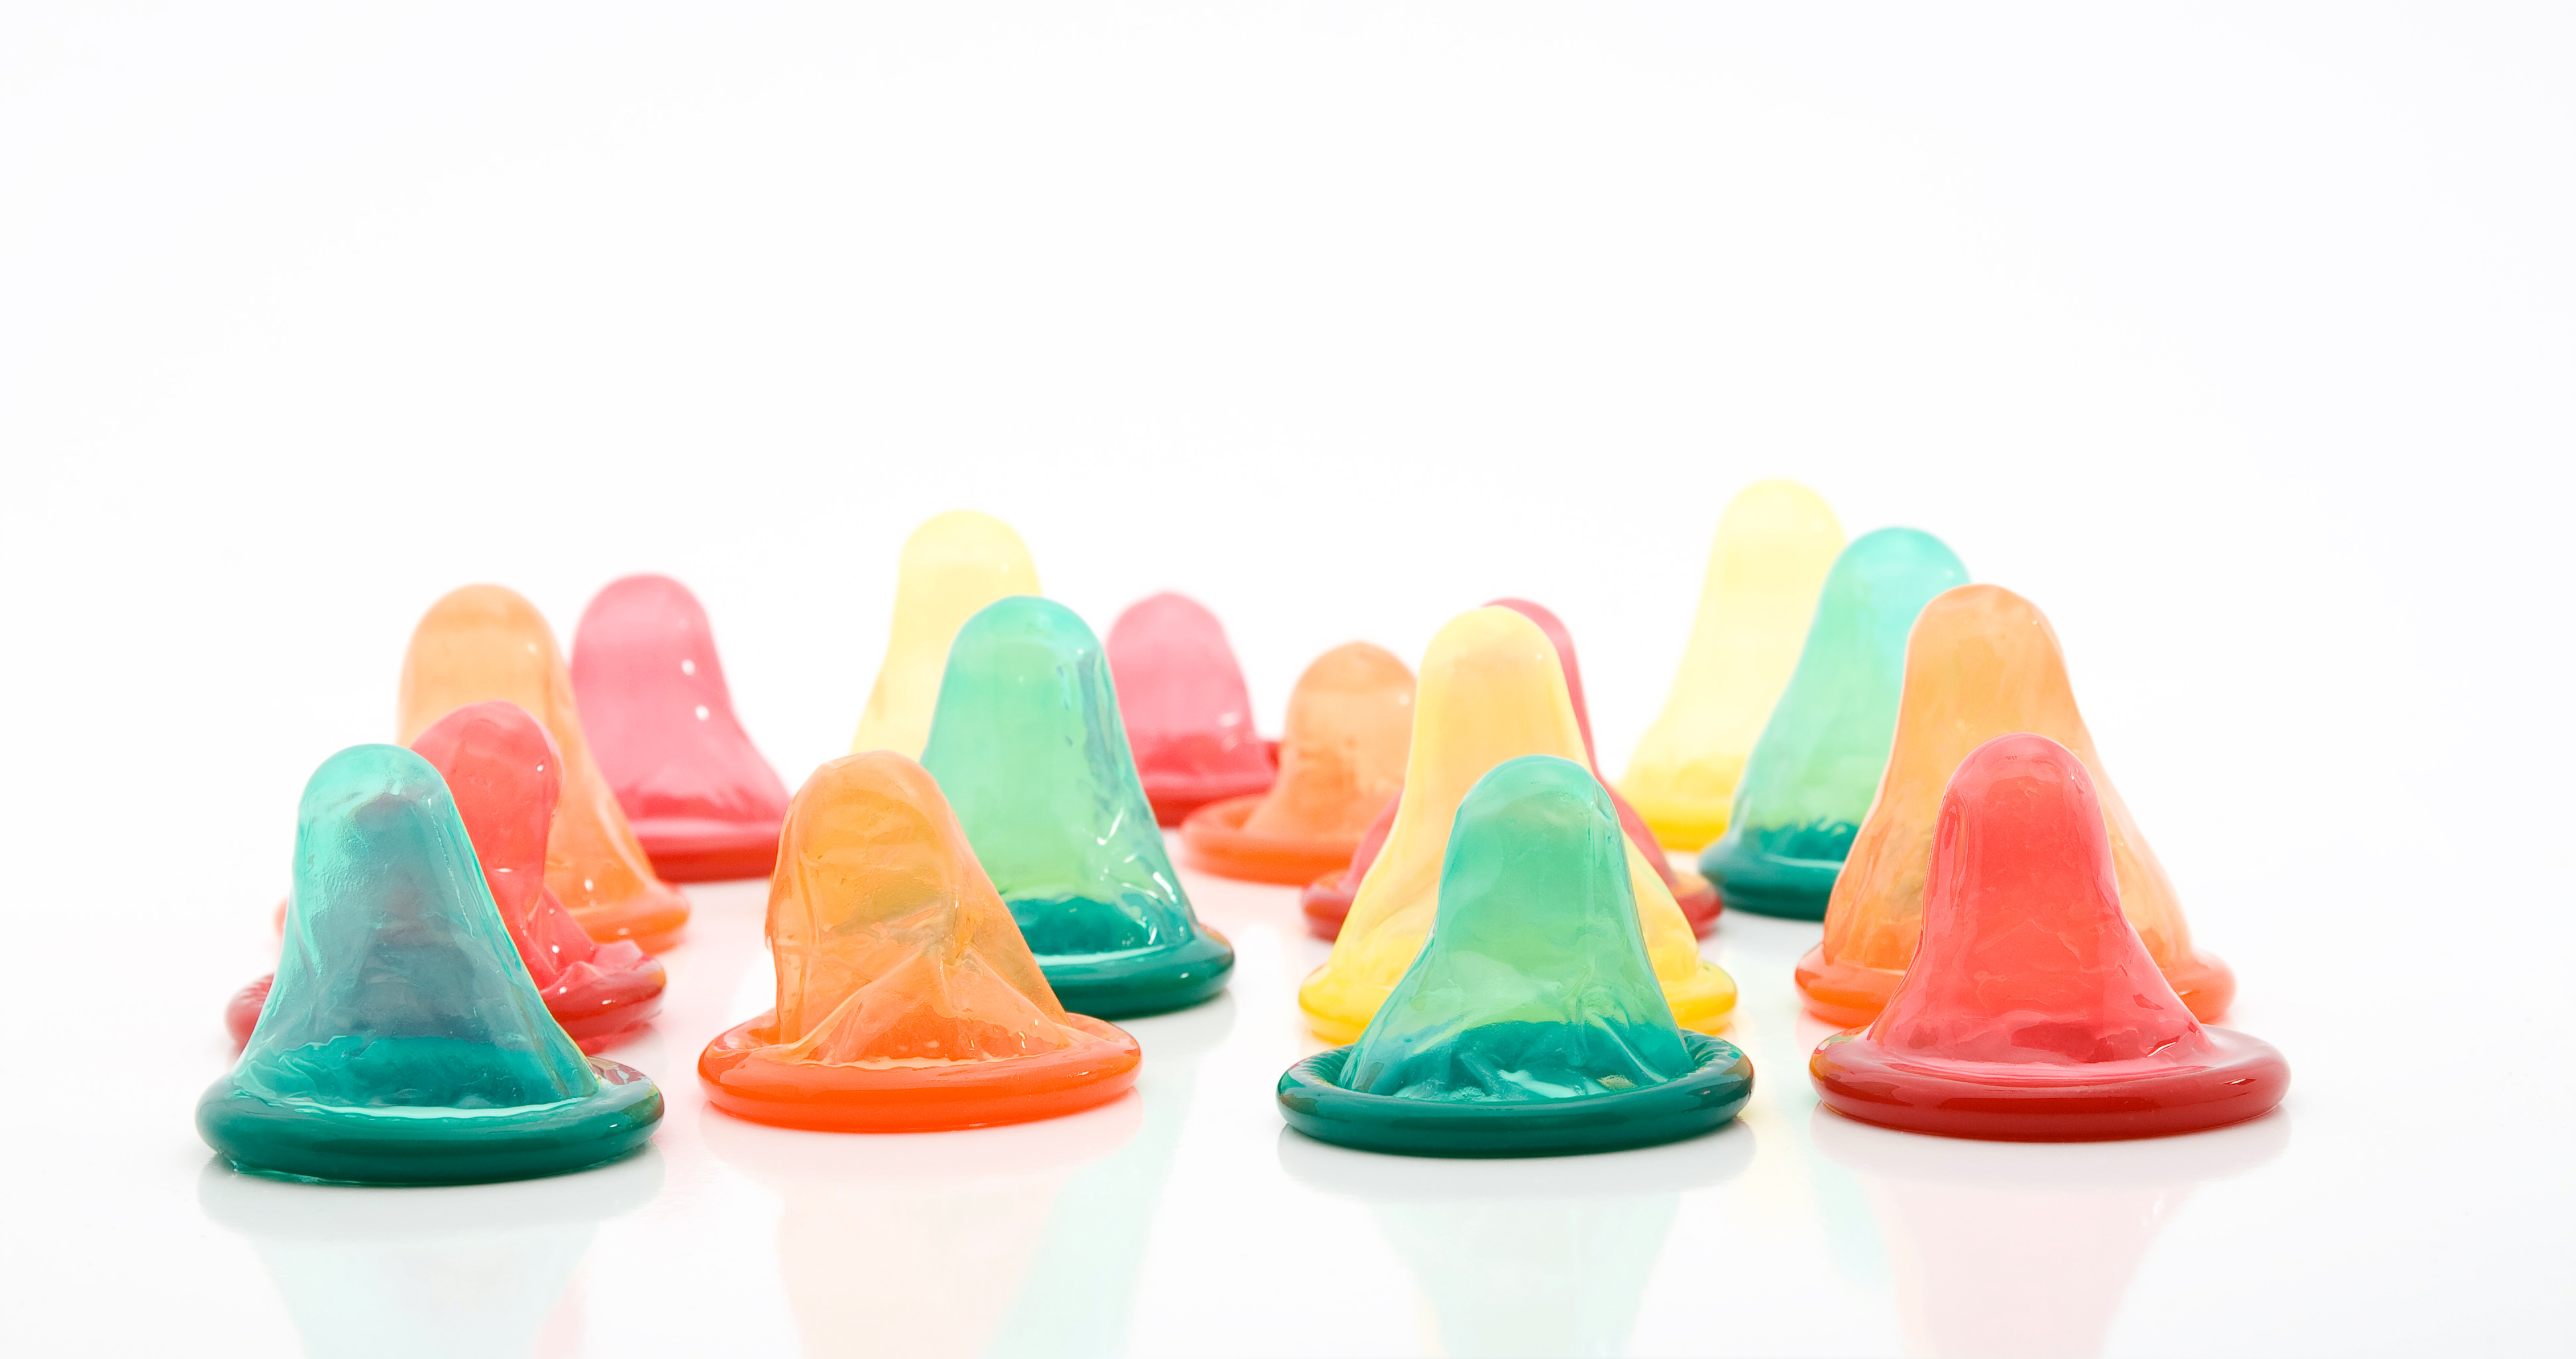 Where to get condoms in Tokyo (and sizes that fit)? Night Owl